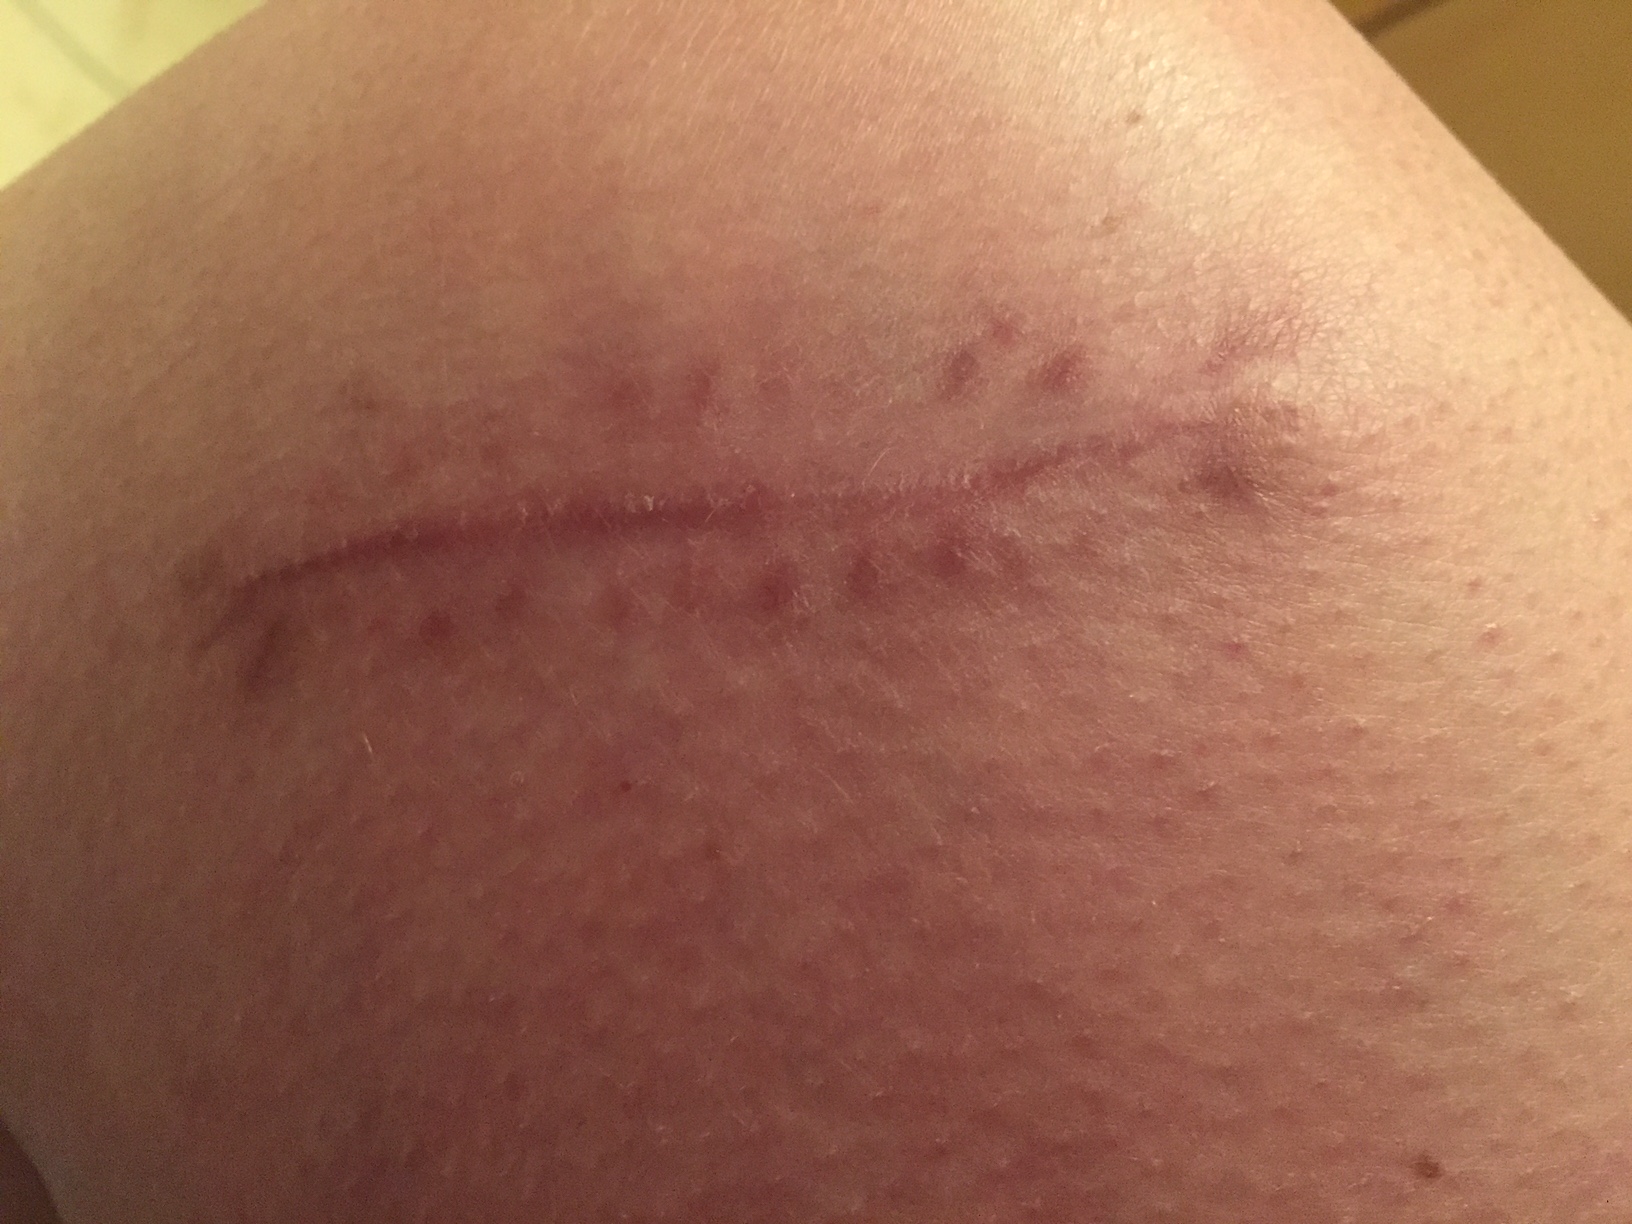 The scar at 10 weeks